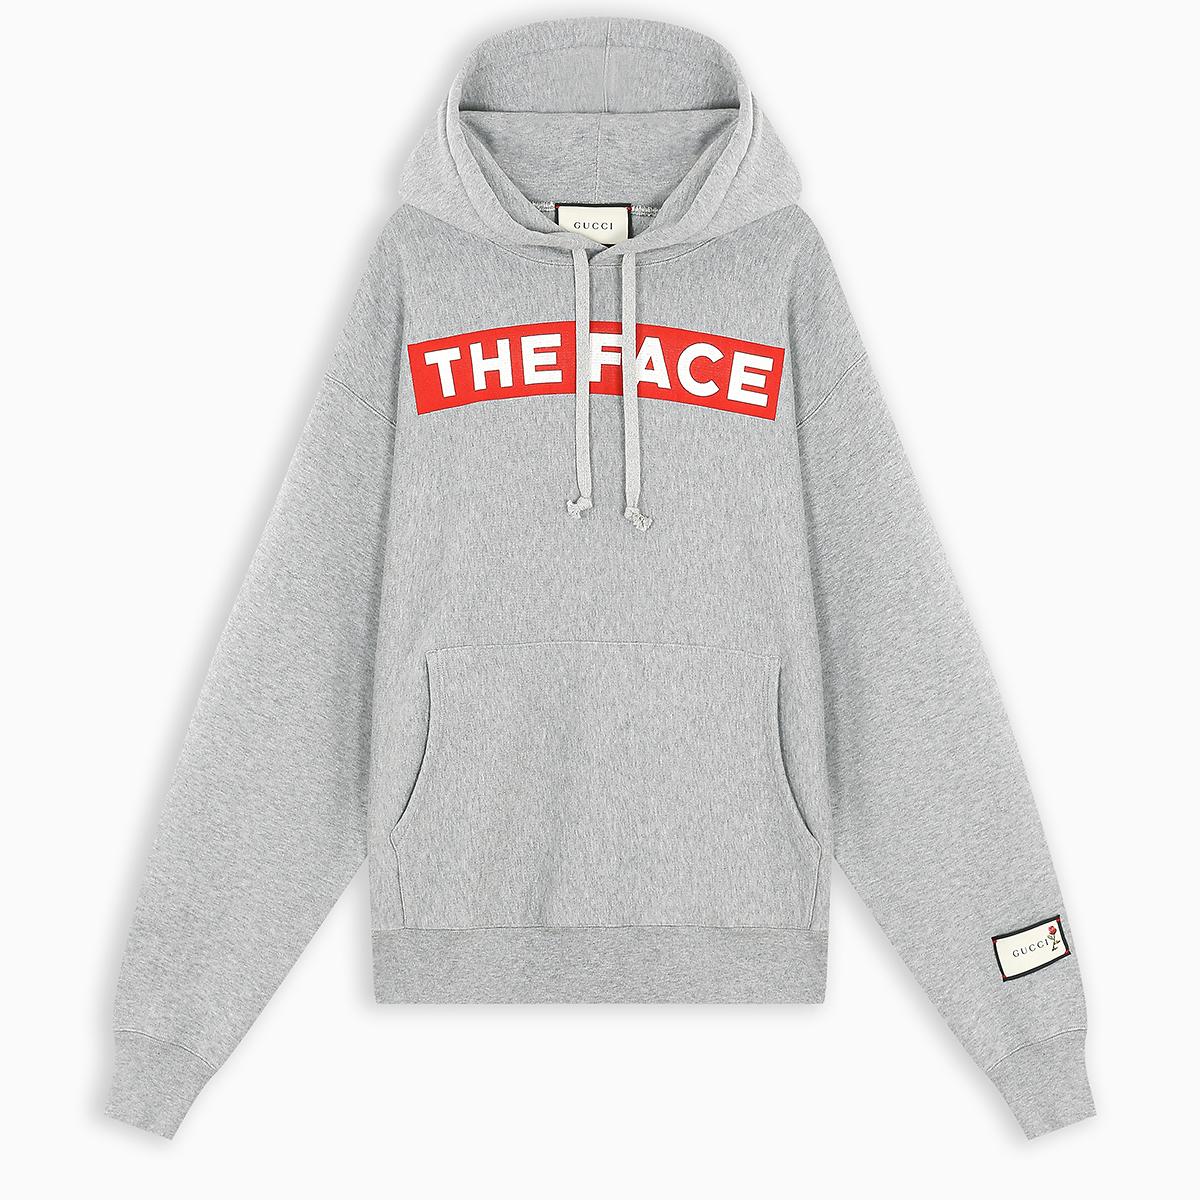 Gucci Cotton Oversized Text Print Hoodie in Grey (Gray) for Men - Lyst